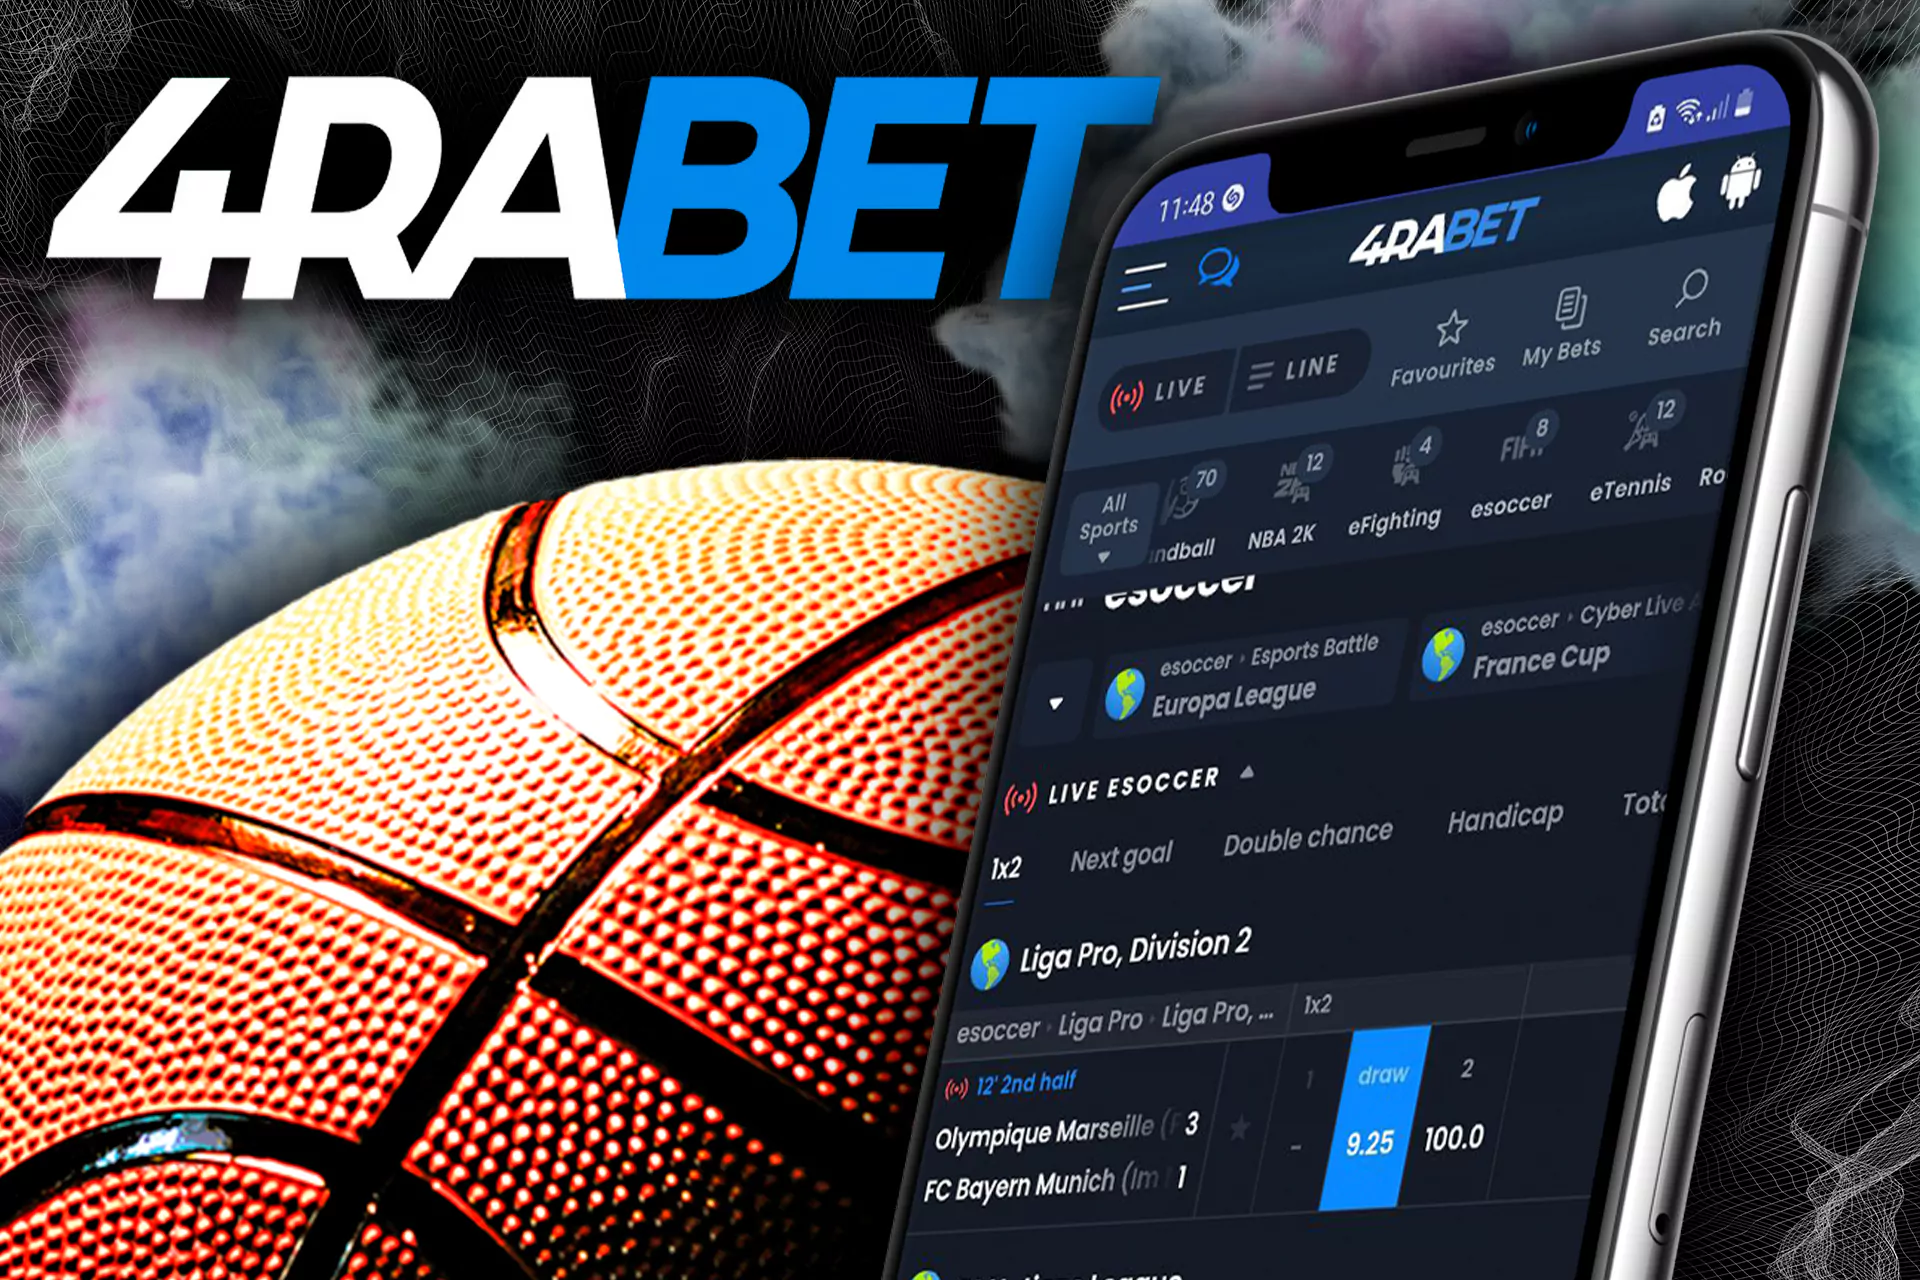 Find the sports betting section in the app and go to it.